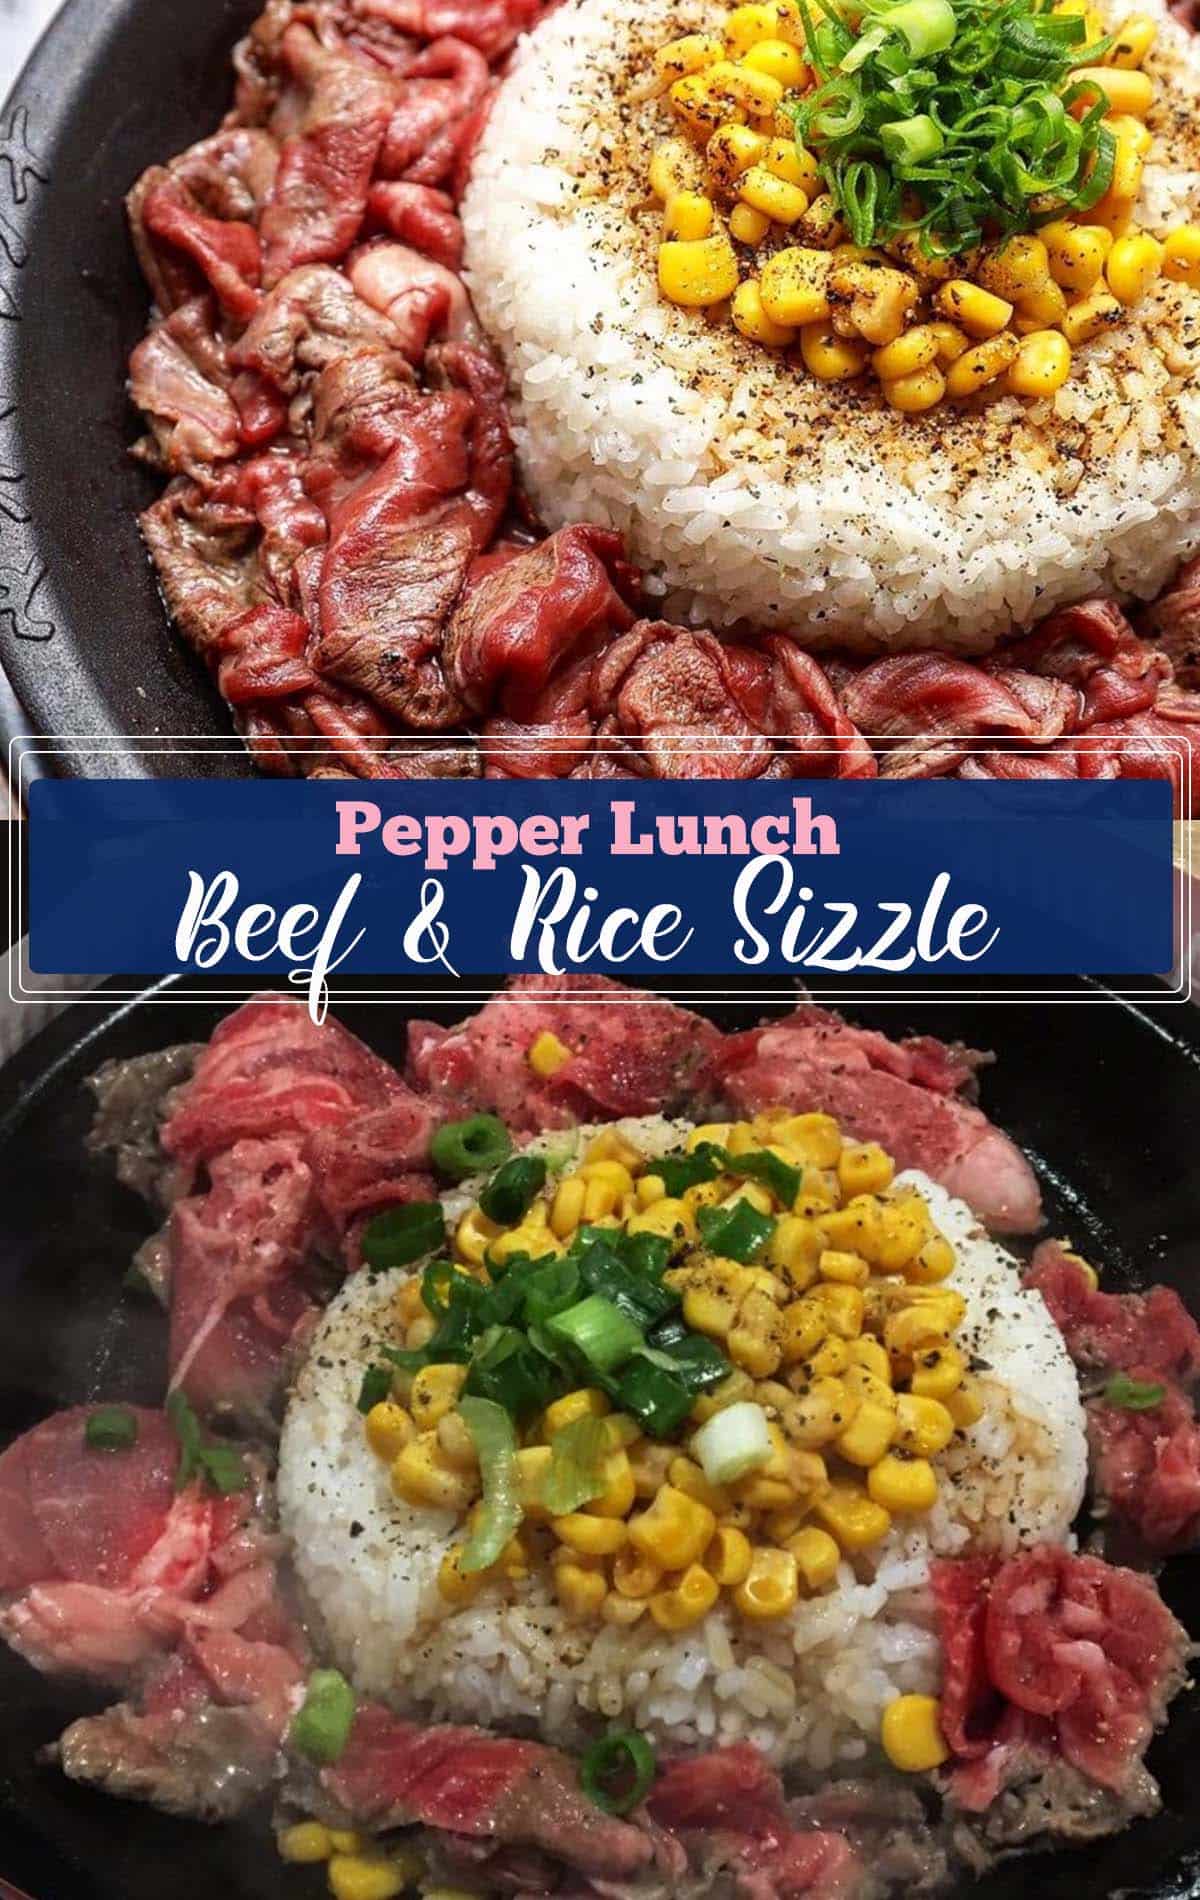 Are you craving a delicious and satisfying Pepper Lunch recipe? Look no further! Our Pepper Lunch Beef and Rice recipe perfectly solve your cravings.